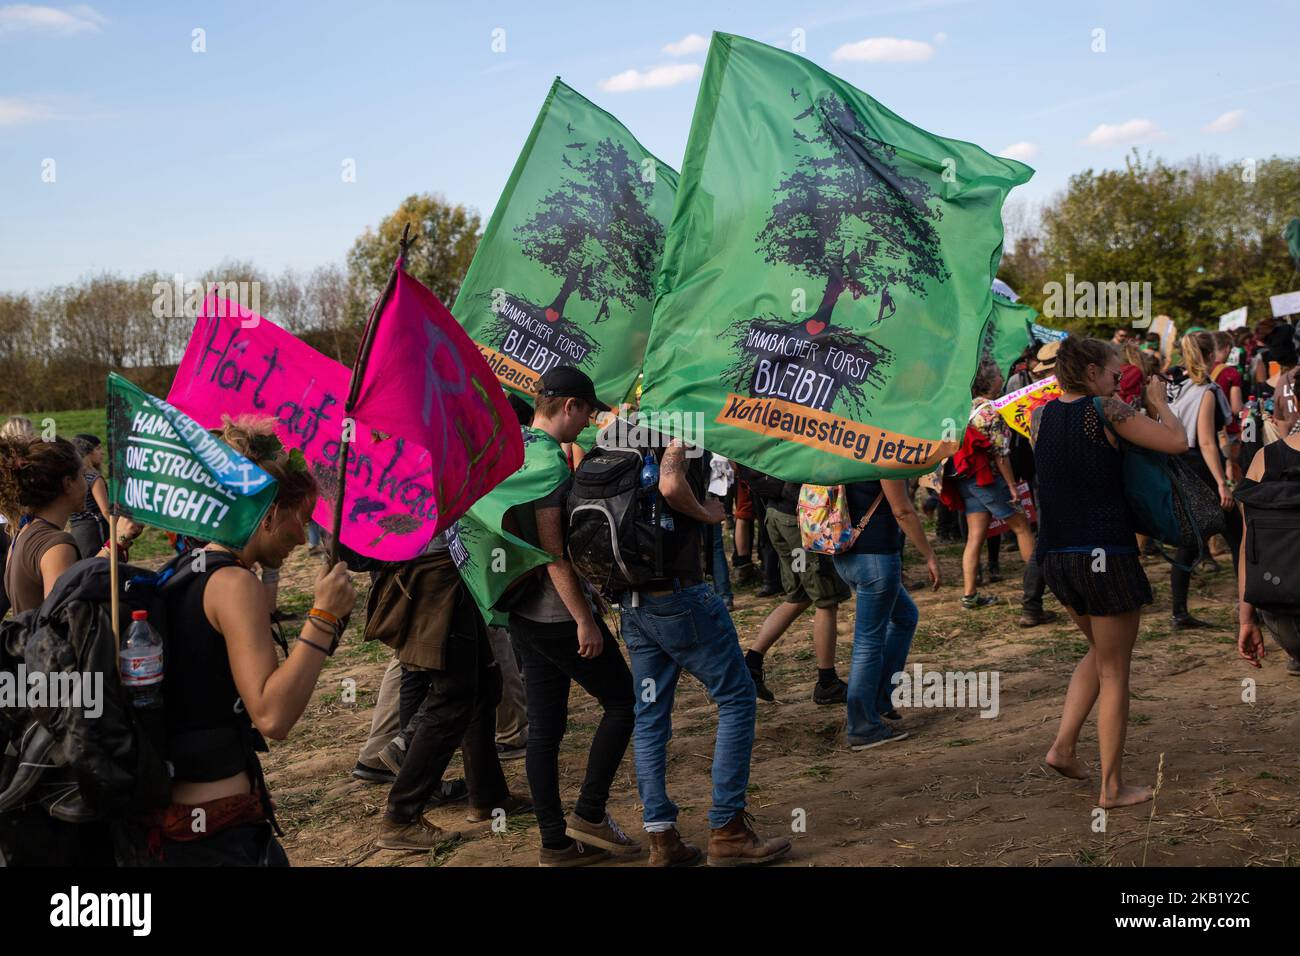 More than 50.000 people demonstrated on October 6, 2018 at the Hambach forest in North Rhine Westphalia, Germany against the open coal mine by the German energy company RWE. They demanded to stop coal mining to protect the Hambach Forest from being cut down by RWE. Several thousand people headed into the forest and started to reoccupy the area that had been cleared from treehouses by the police over several weeks. Activists build new treehouses and wooden barricades. (Photo by David Speier/NurPhoto) Stock Photo